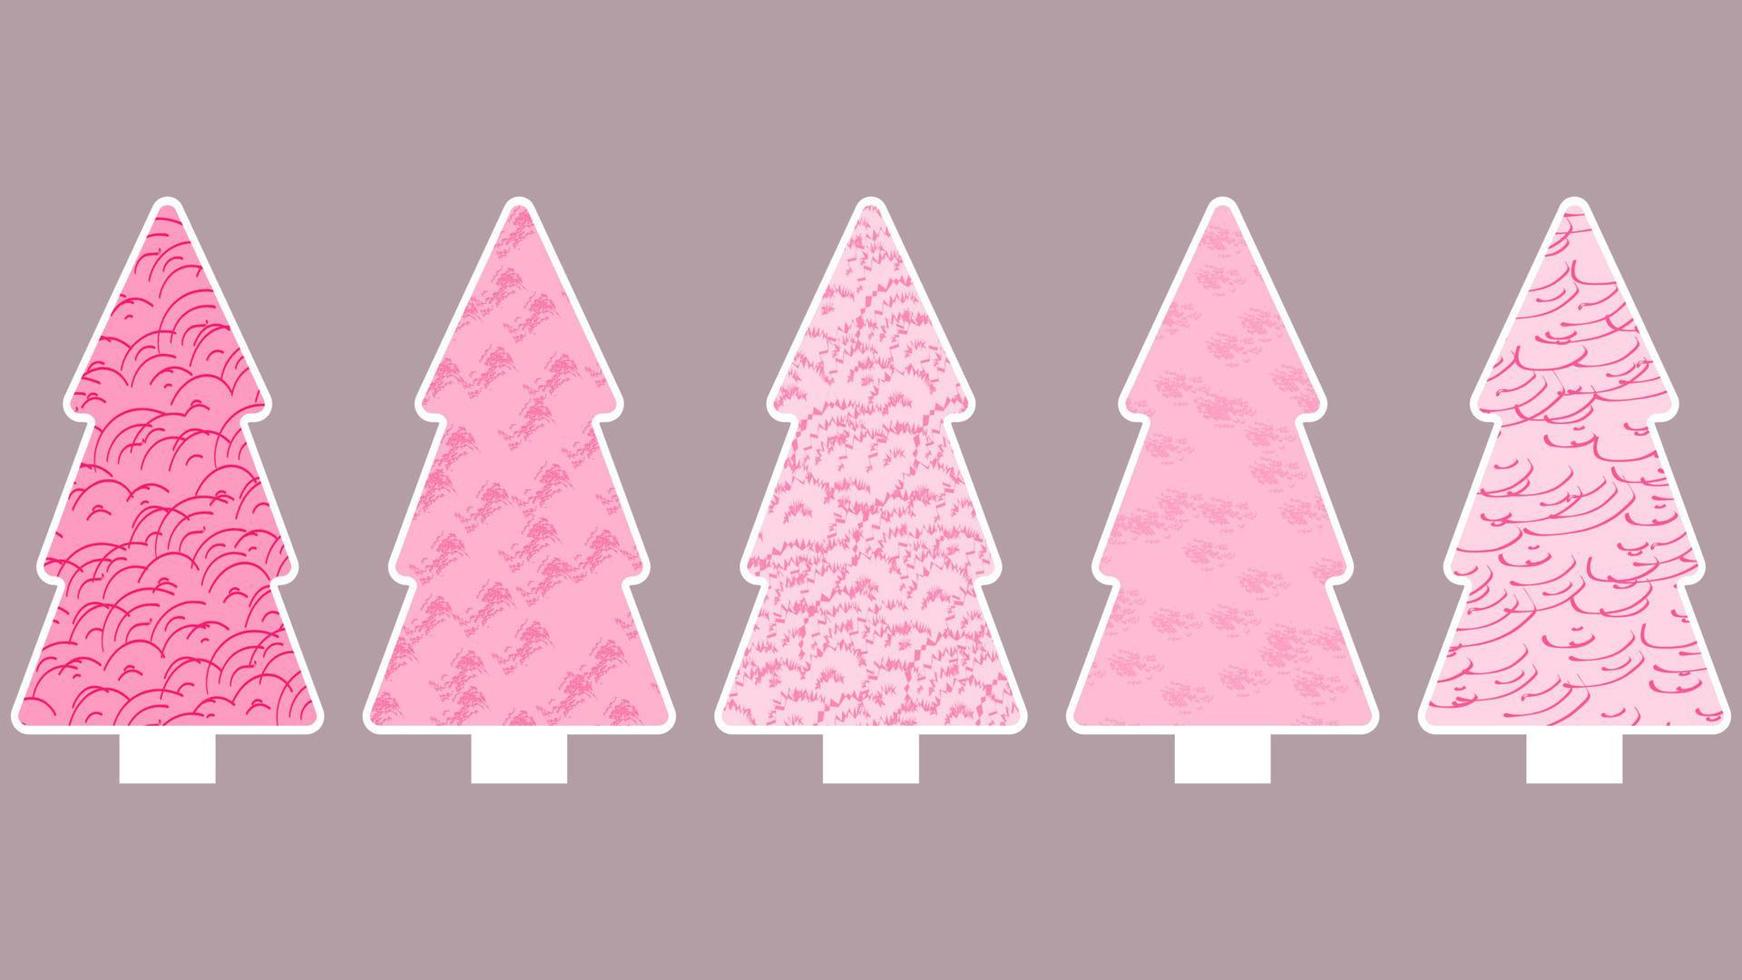 five pink monochrome Christmas trees with white outline and abstract textured pattern. flat style vector